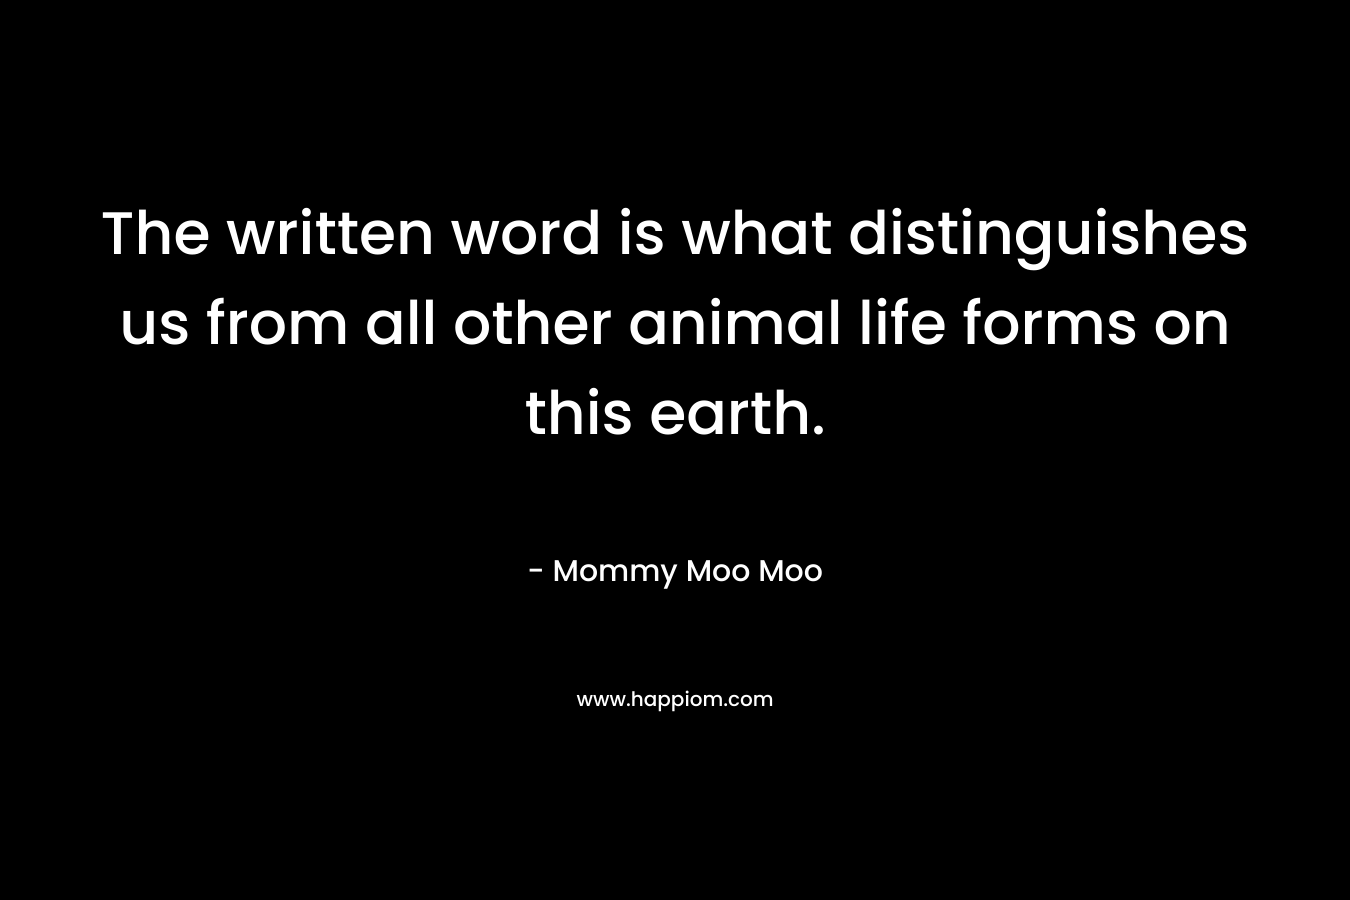 The written word is what distinguishes us from all other animal life forms on this earth. – Mommy Moo Moo